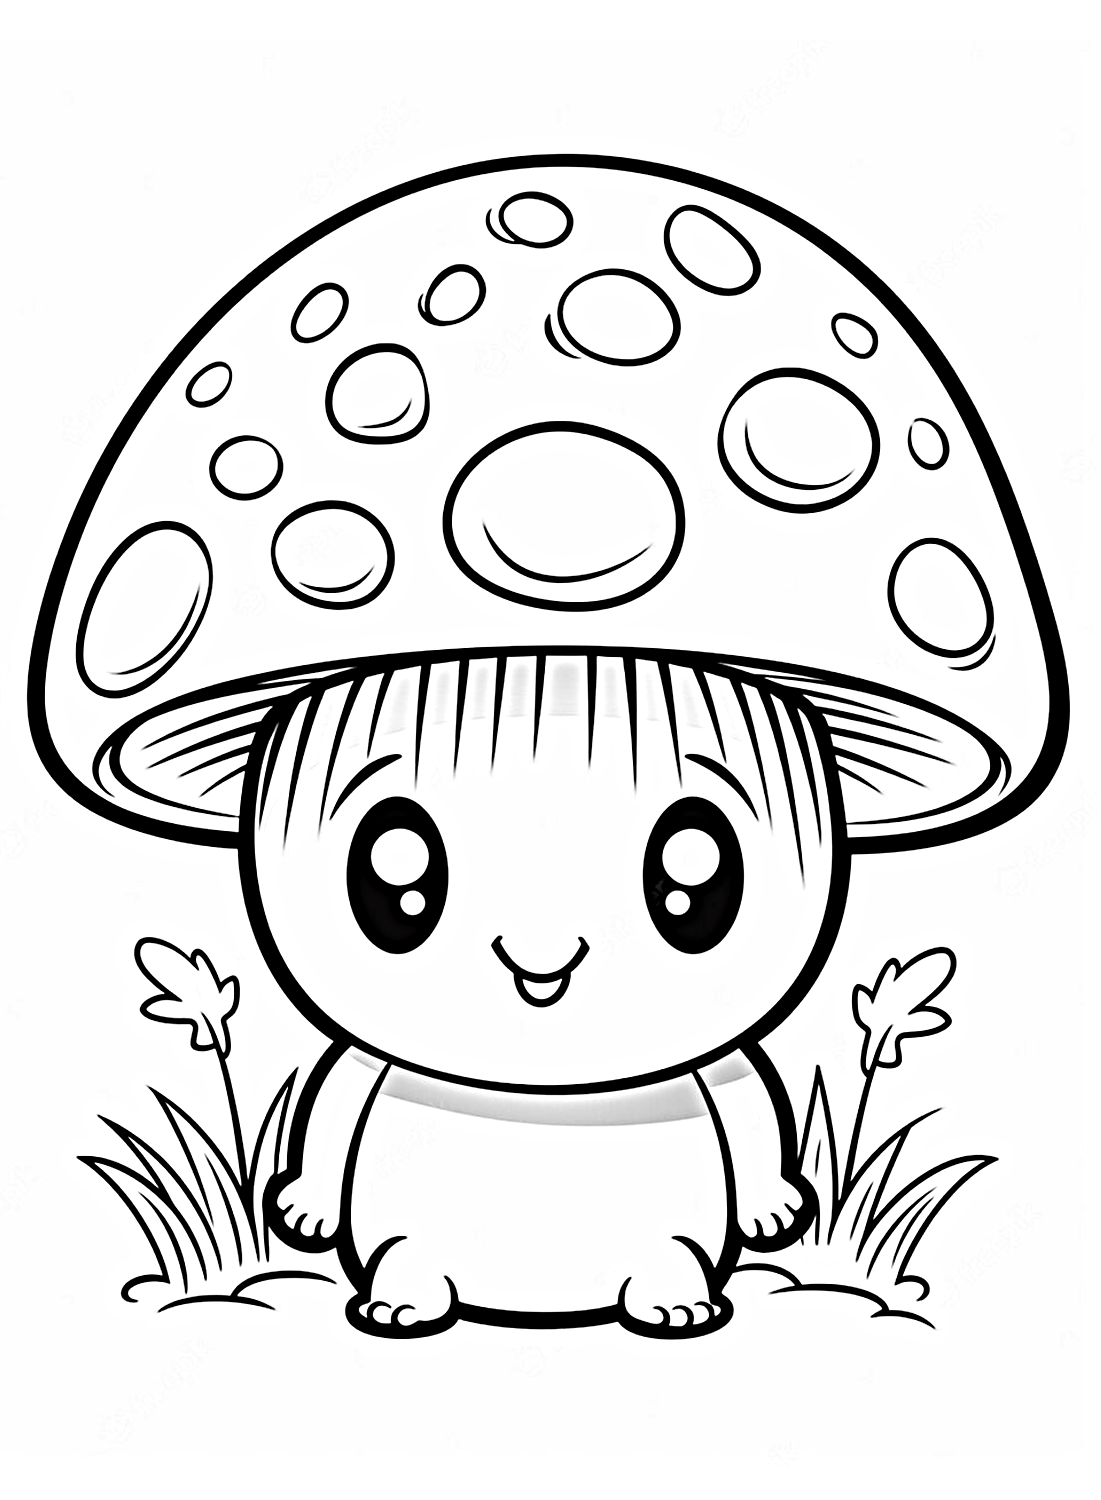 A baby mushroom coloring picture